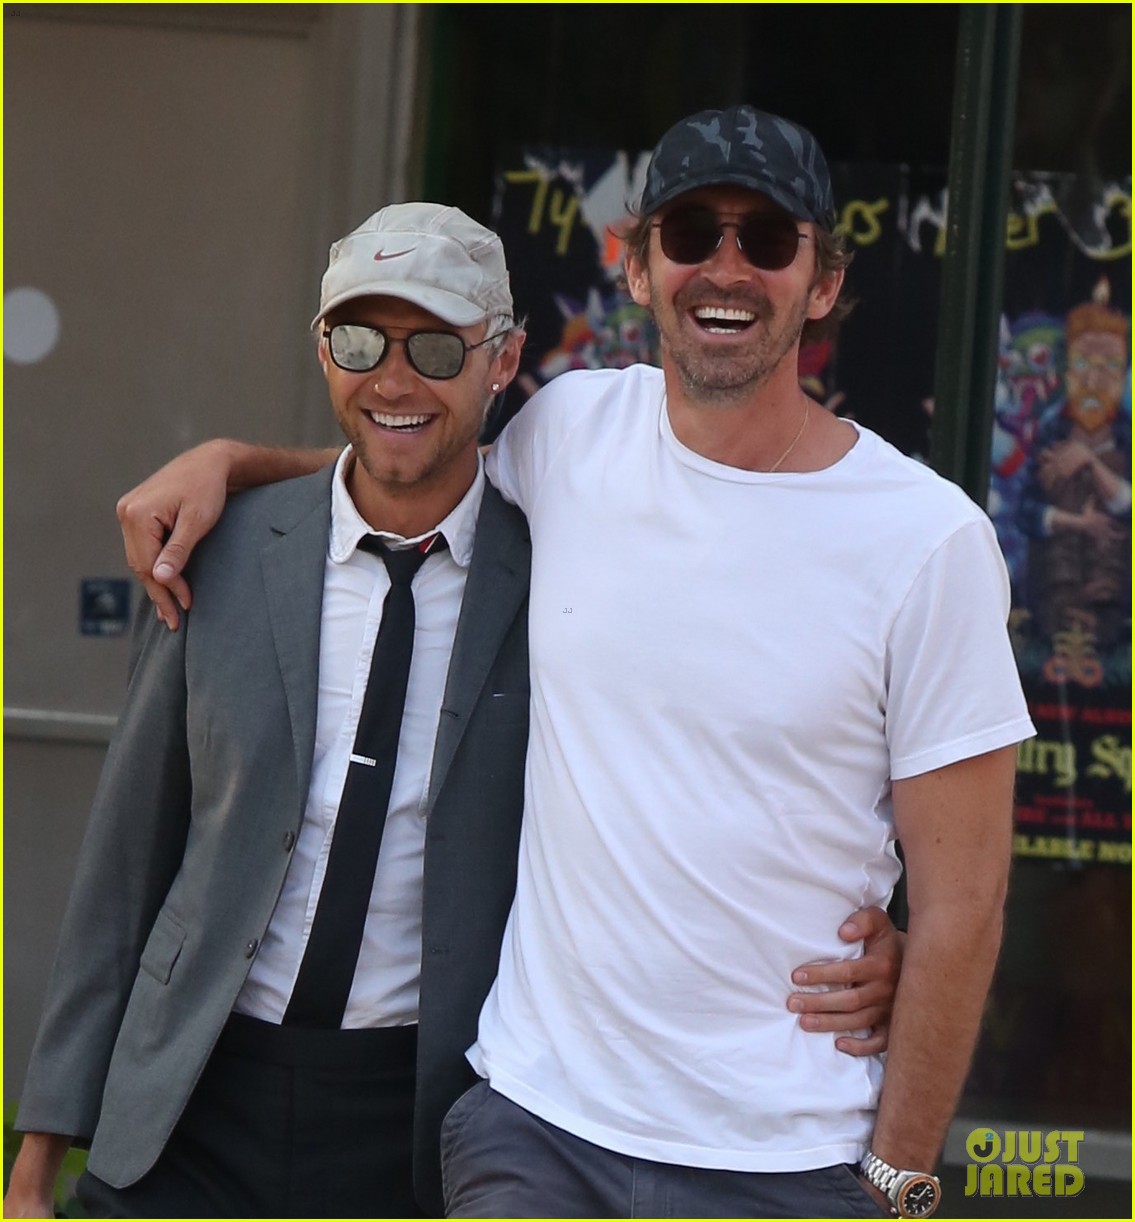 Lee Pace & Boyfriend Matthew Foley Couple Up for NYC Stroll! lee pace s...